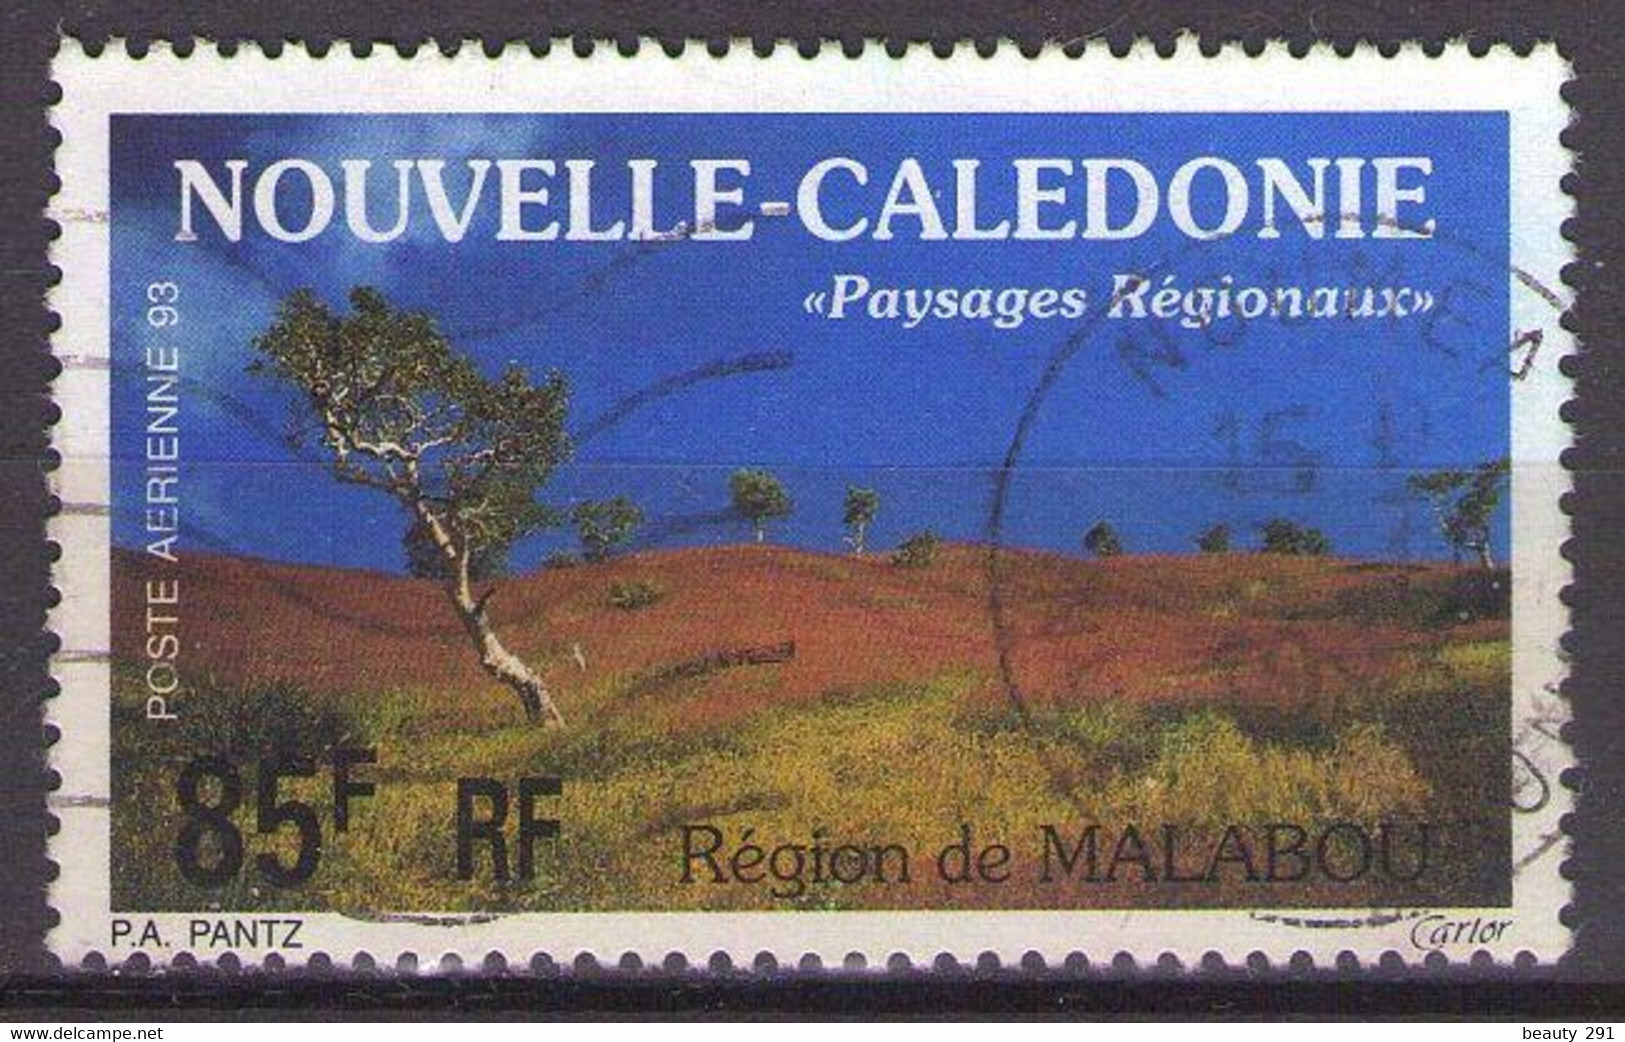 NOUVELLE CALEDONIE - POSTE AERIENNE  1993  Mi 961   USED - Used Stamps